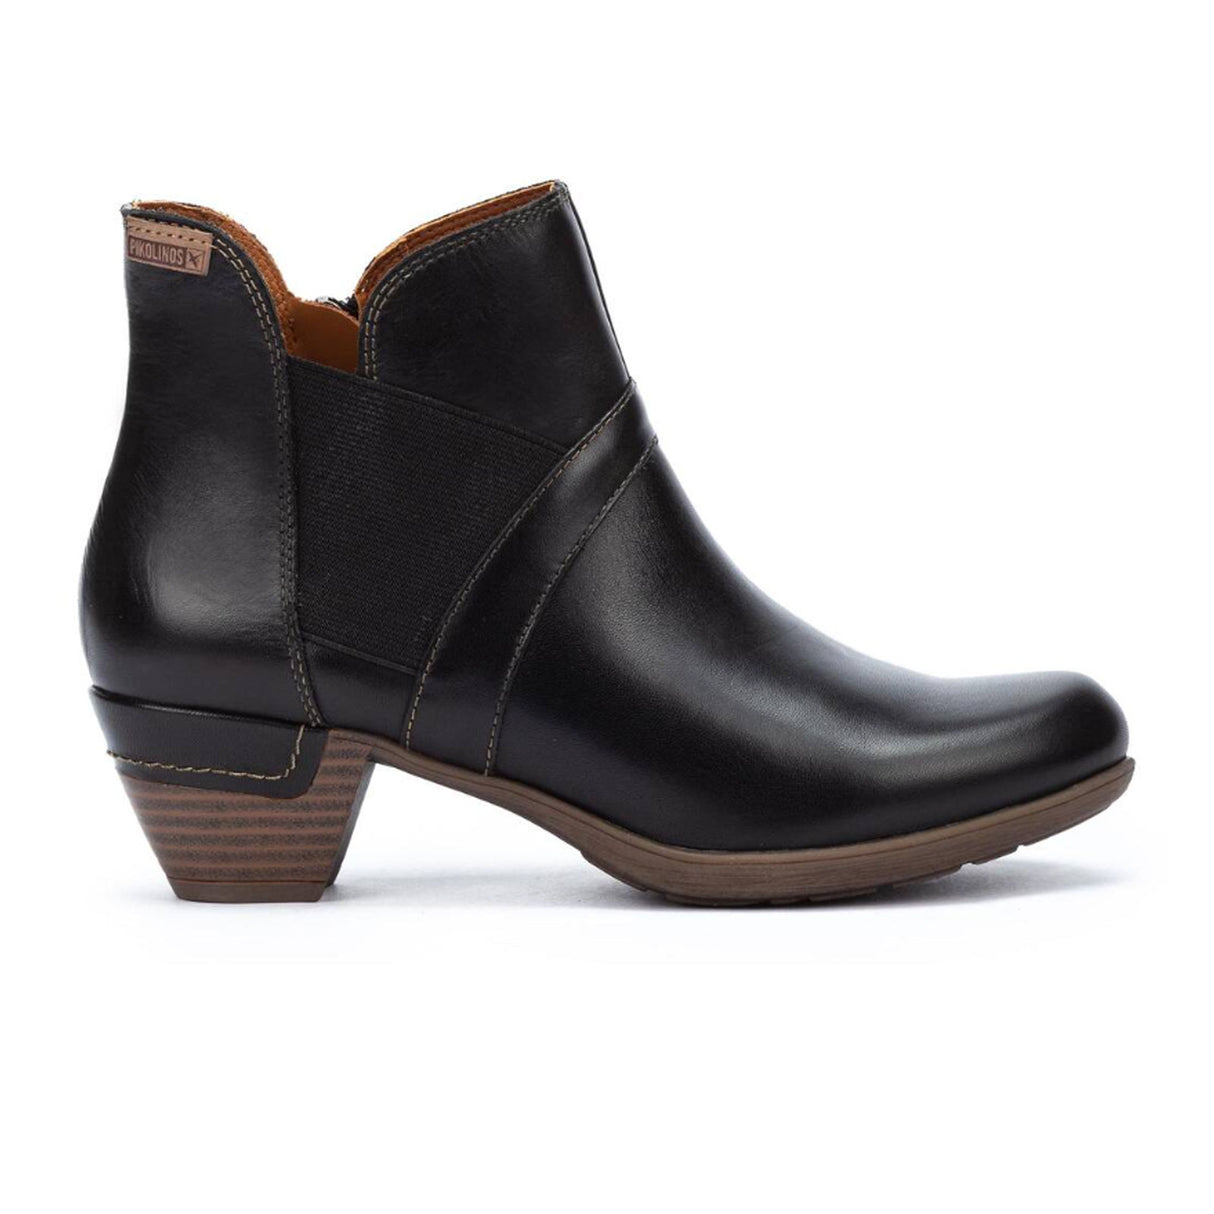 Pikolinos Rotterdam 902-8932 Ankle Boot (Women) - Black Boots - Fashion - Ankle Boot - The Heel Shoe Fitters